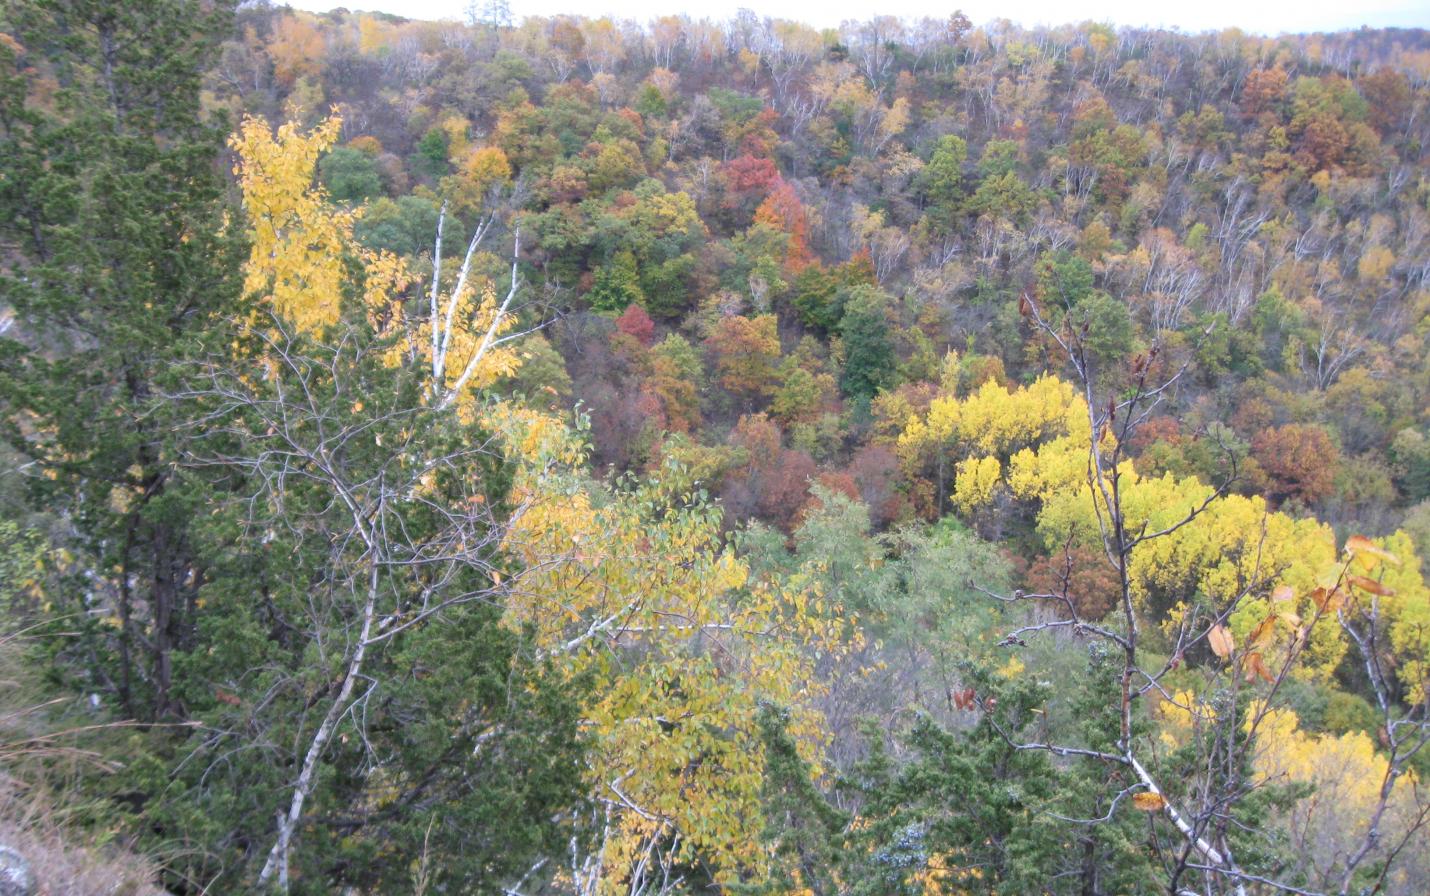 Beck/Miller Bluff in the Fall